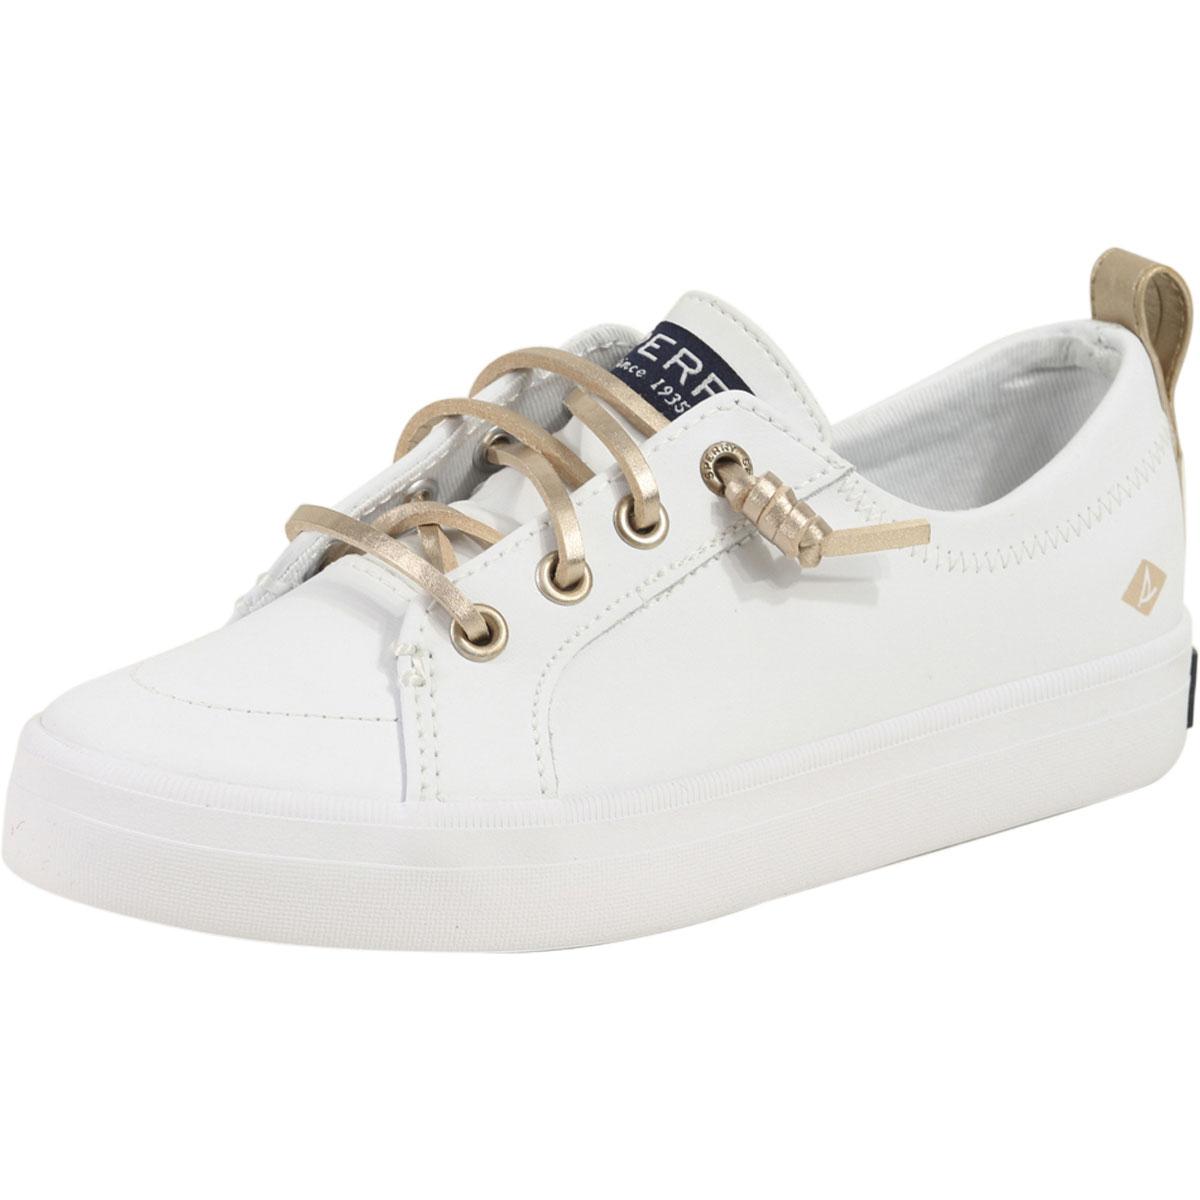 ForOffice | sperry top sider crest vibe